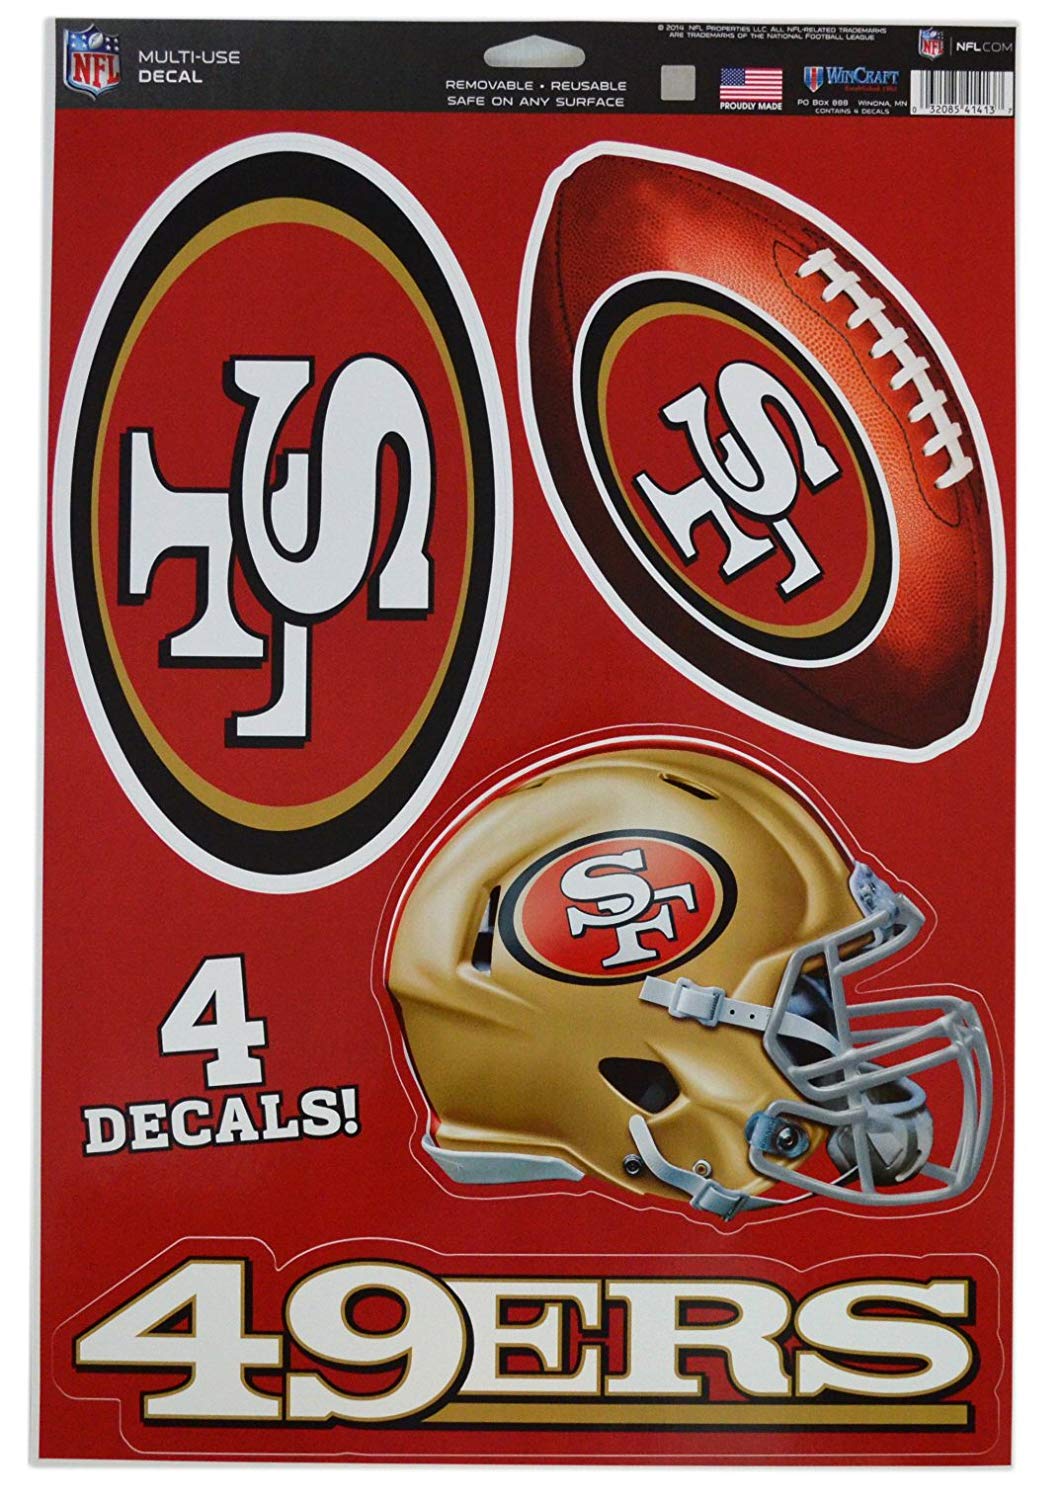 WinCraft Official National Football League Fan Shop Licensed NFL Shop Multi-use Decals (San Francisco 49ers)